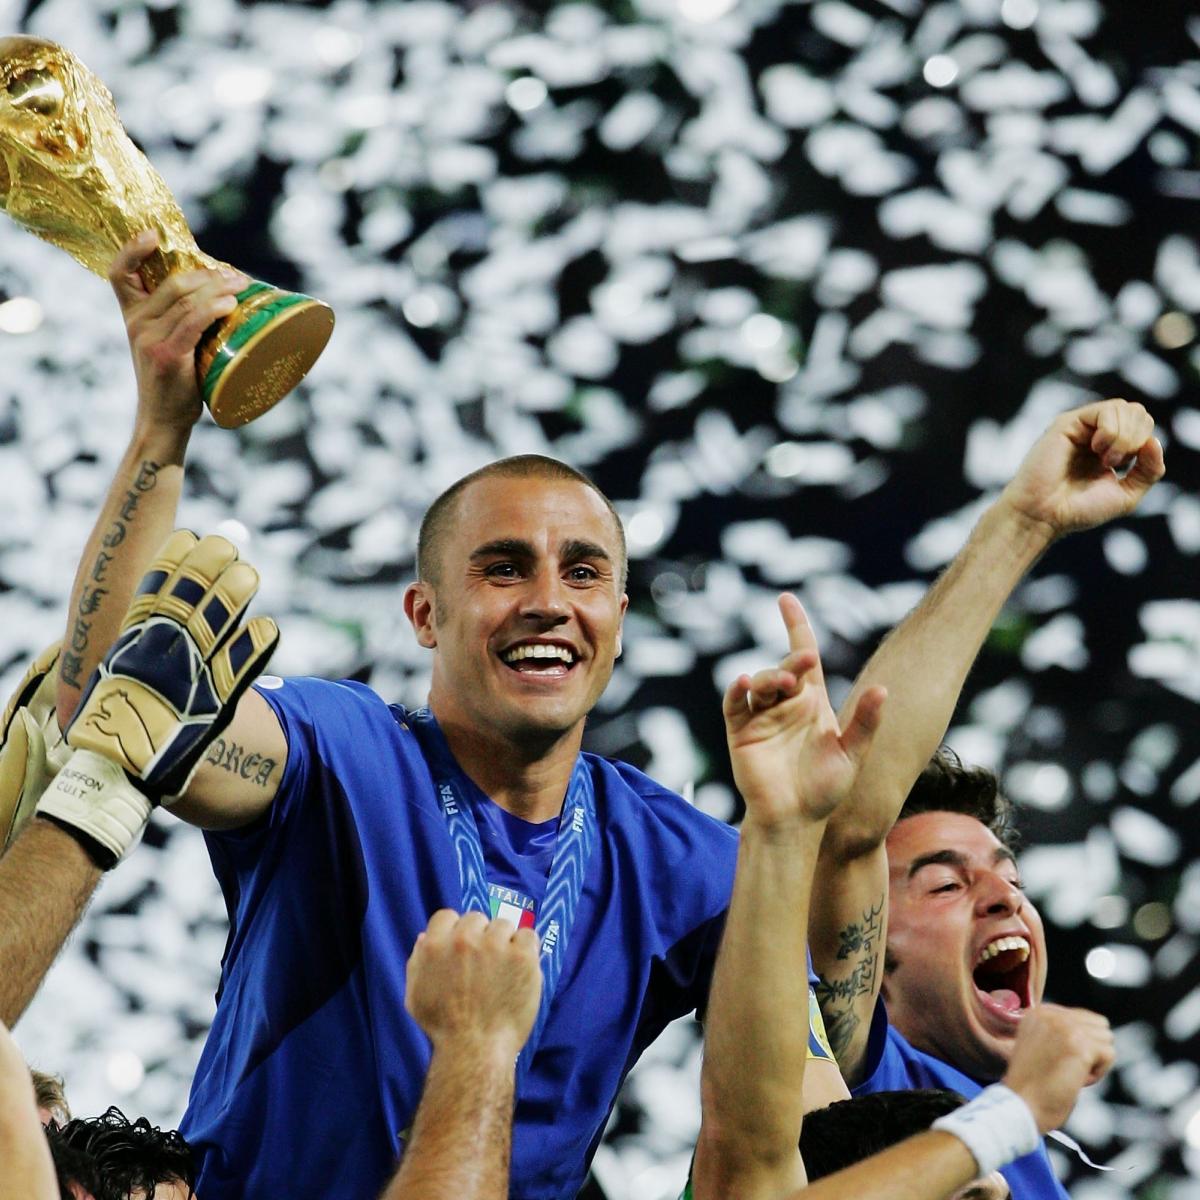 Italy: The Journey to Their 2006 World Cup Victory